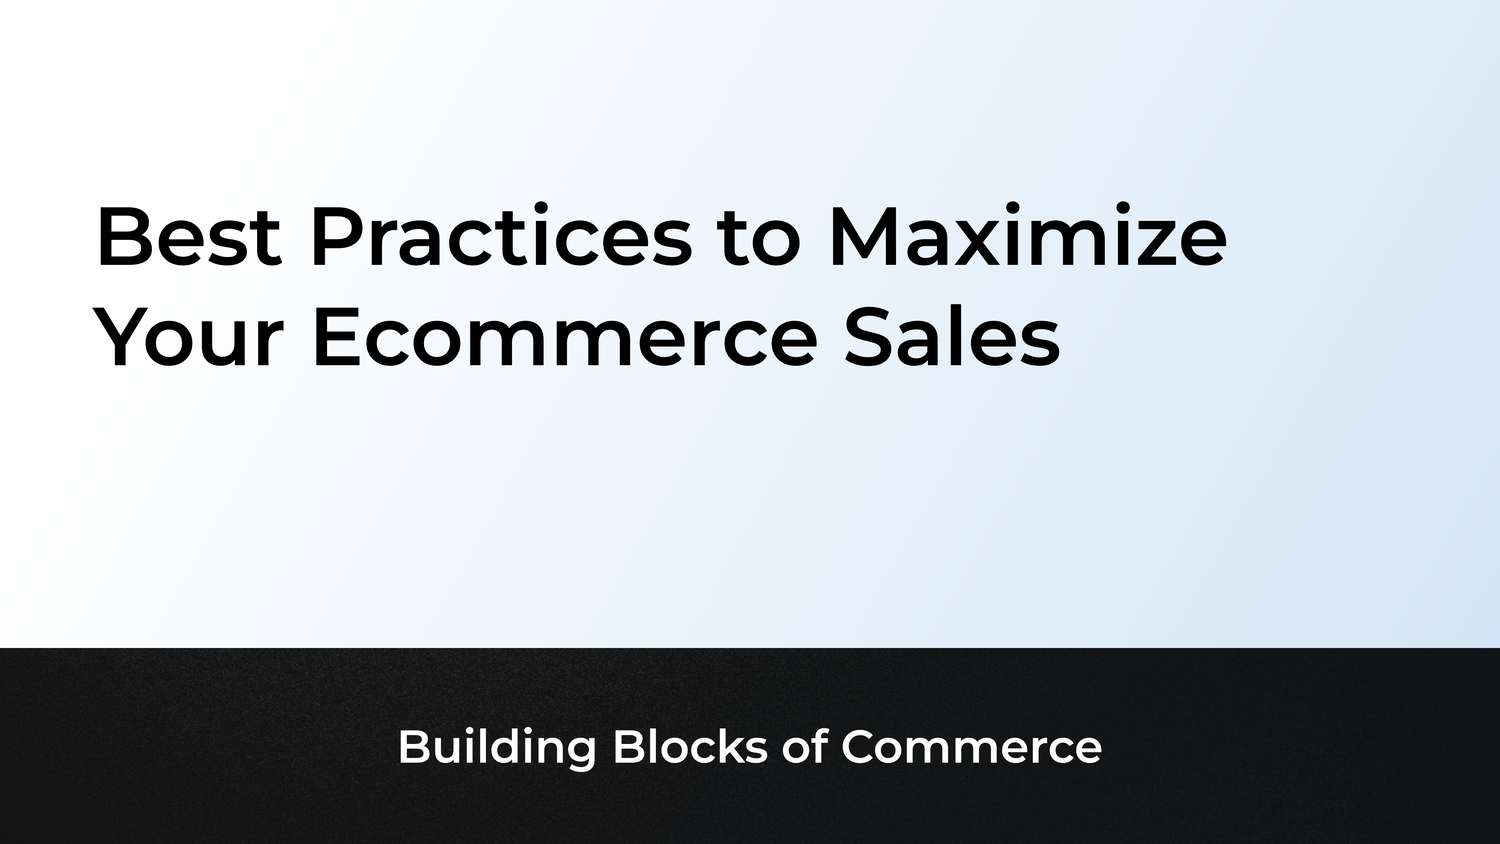 Best Practices to Maximize Your Ecommerce Sales